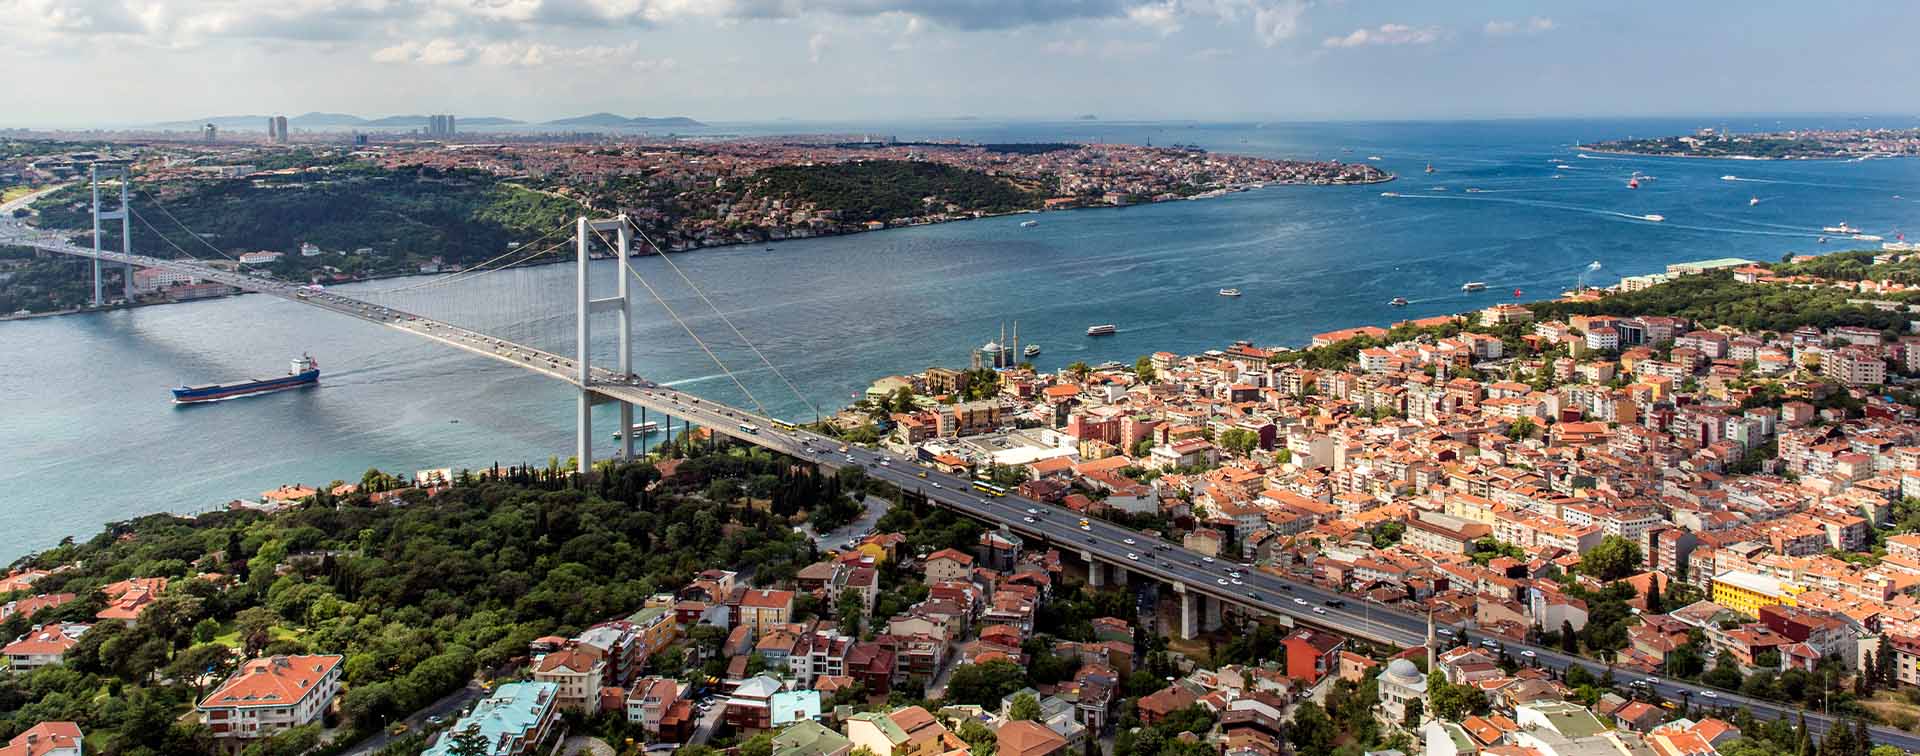 Aerial view of Bosphorus bridge in İstanbul stretched over the water